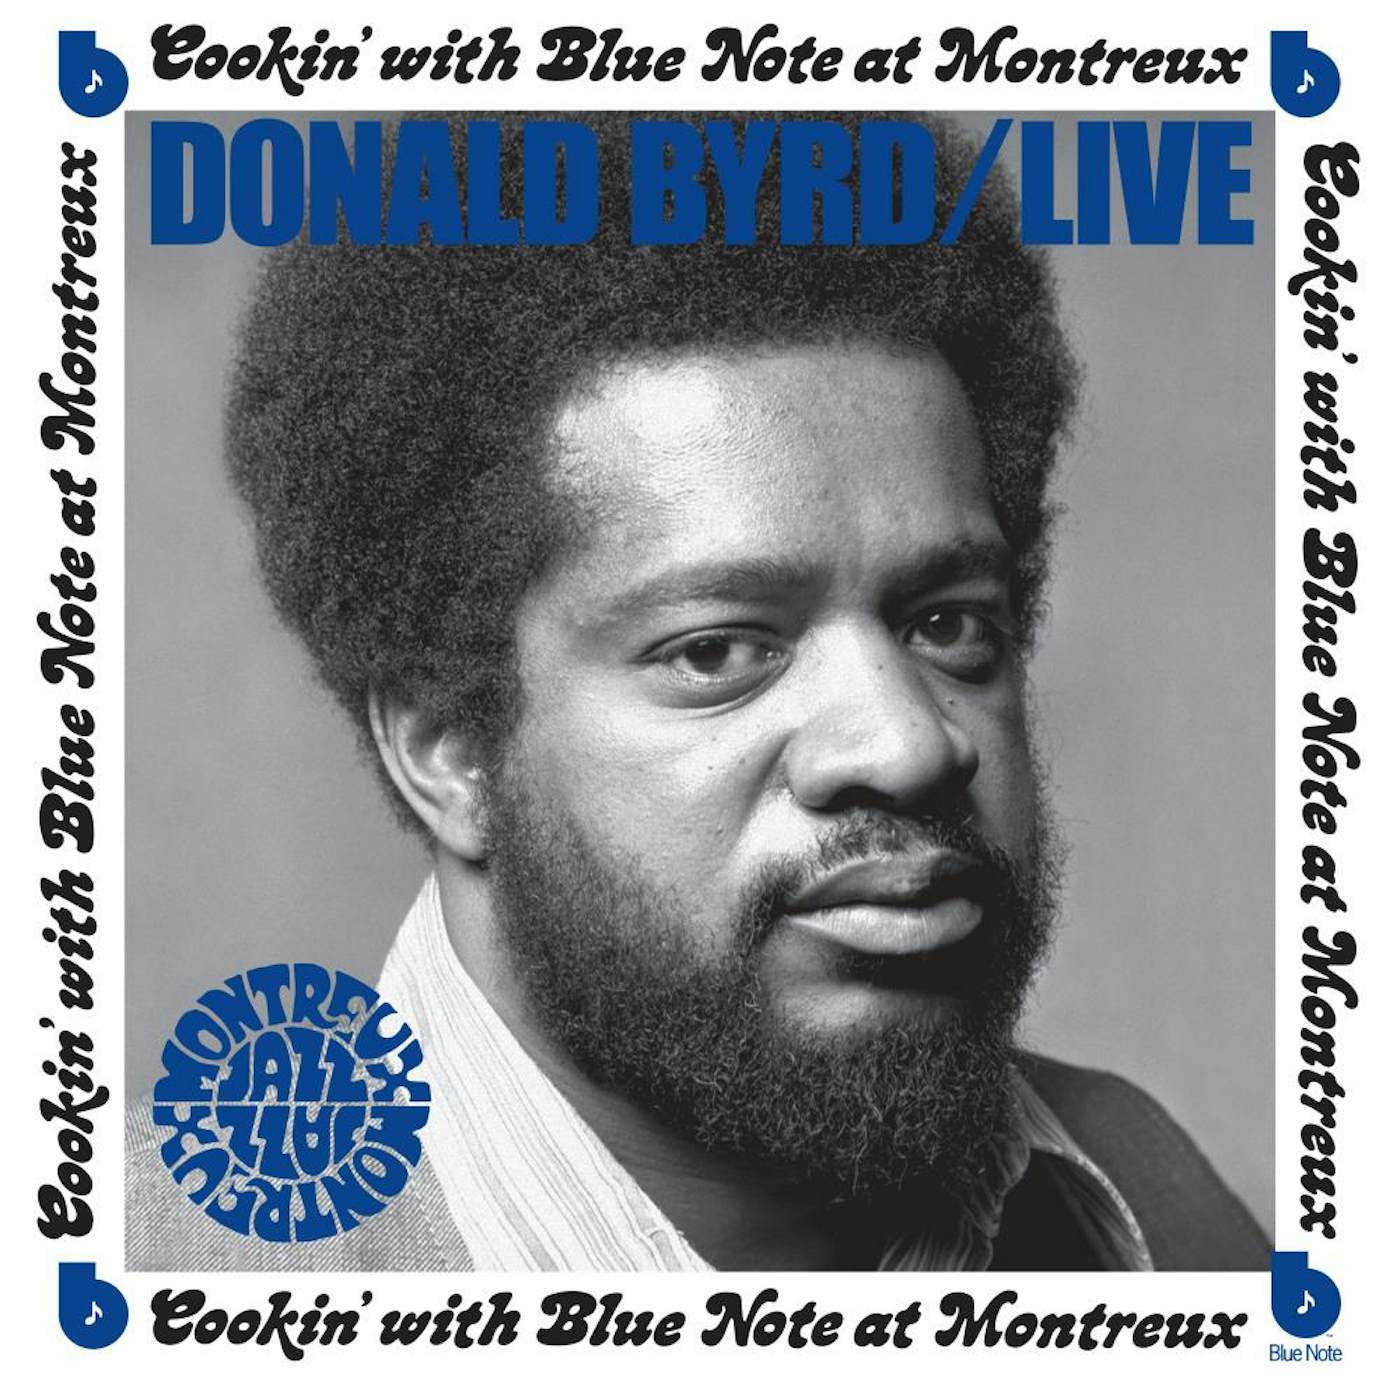 Donald Byrd LIVE: COOKIN' WITH BLUE NOTE AT MONTREUX JULY 5, 1973 CD